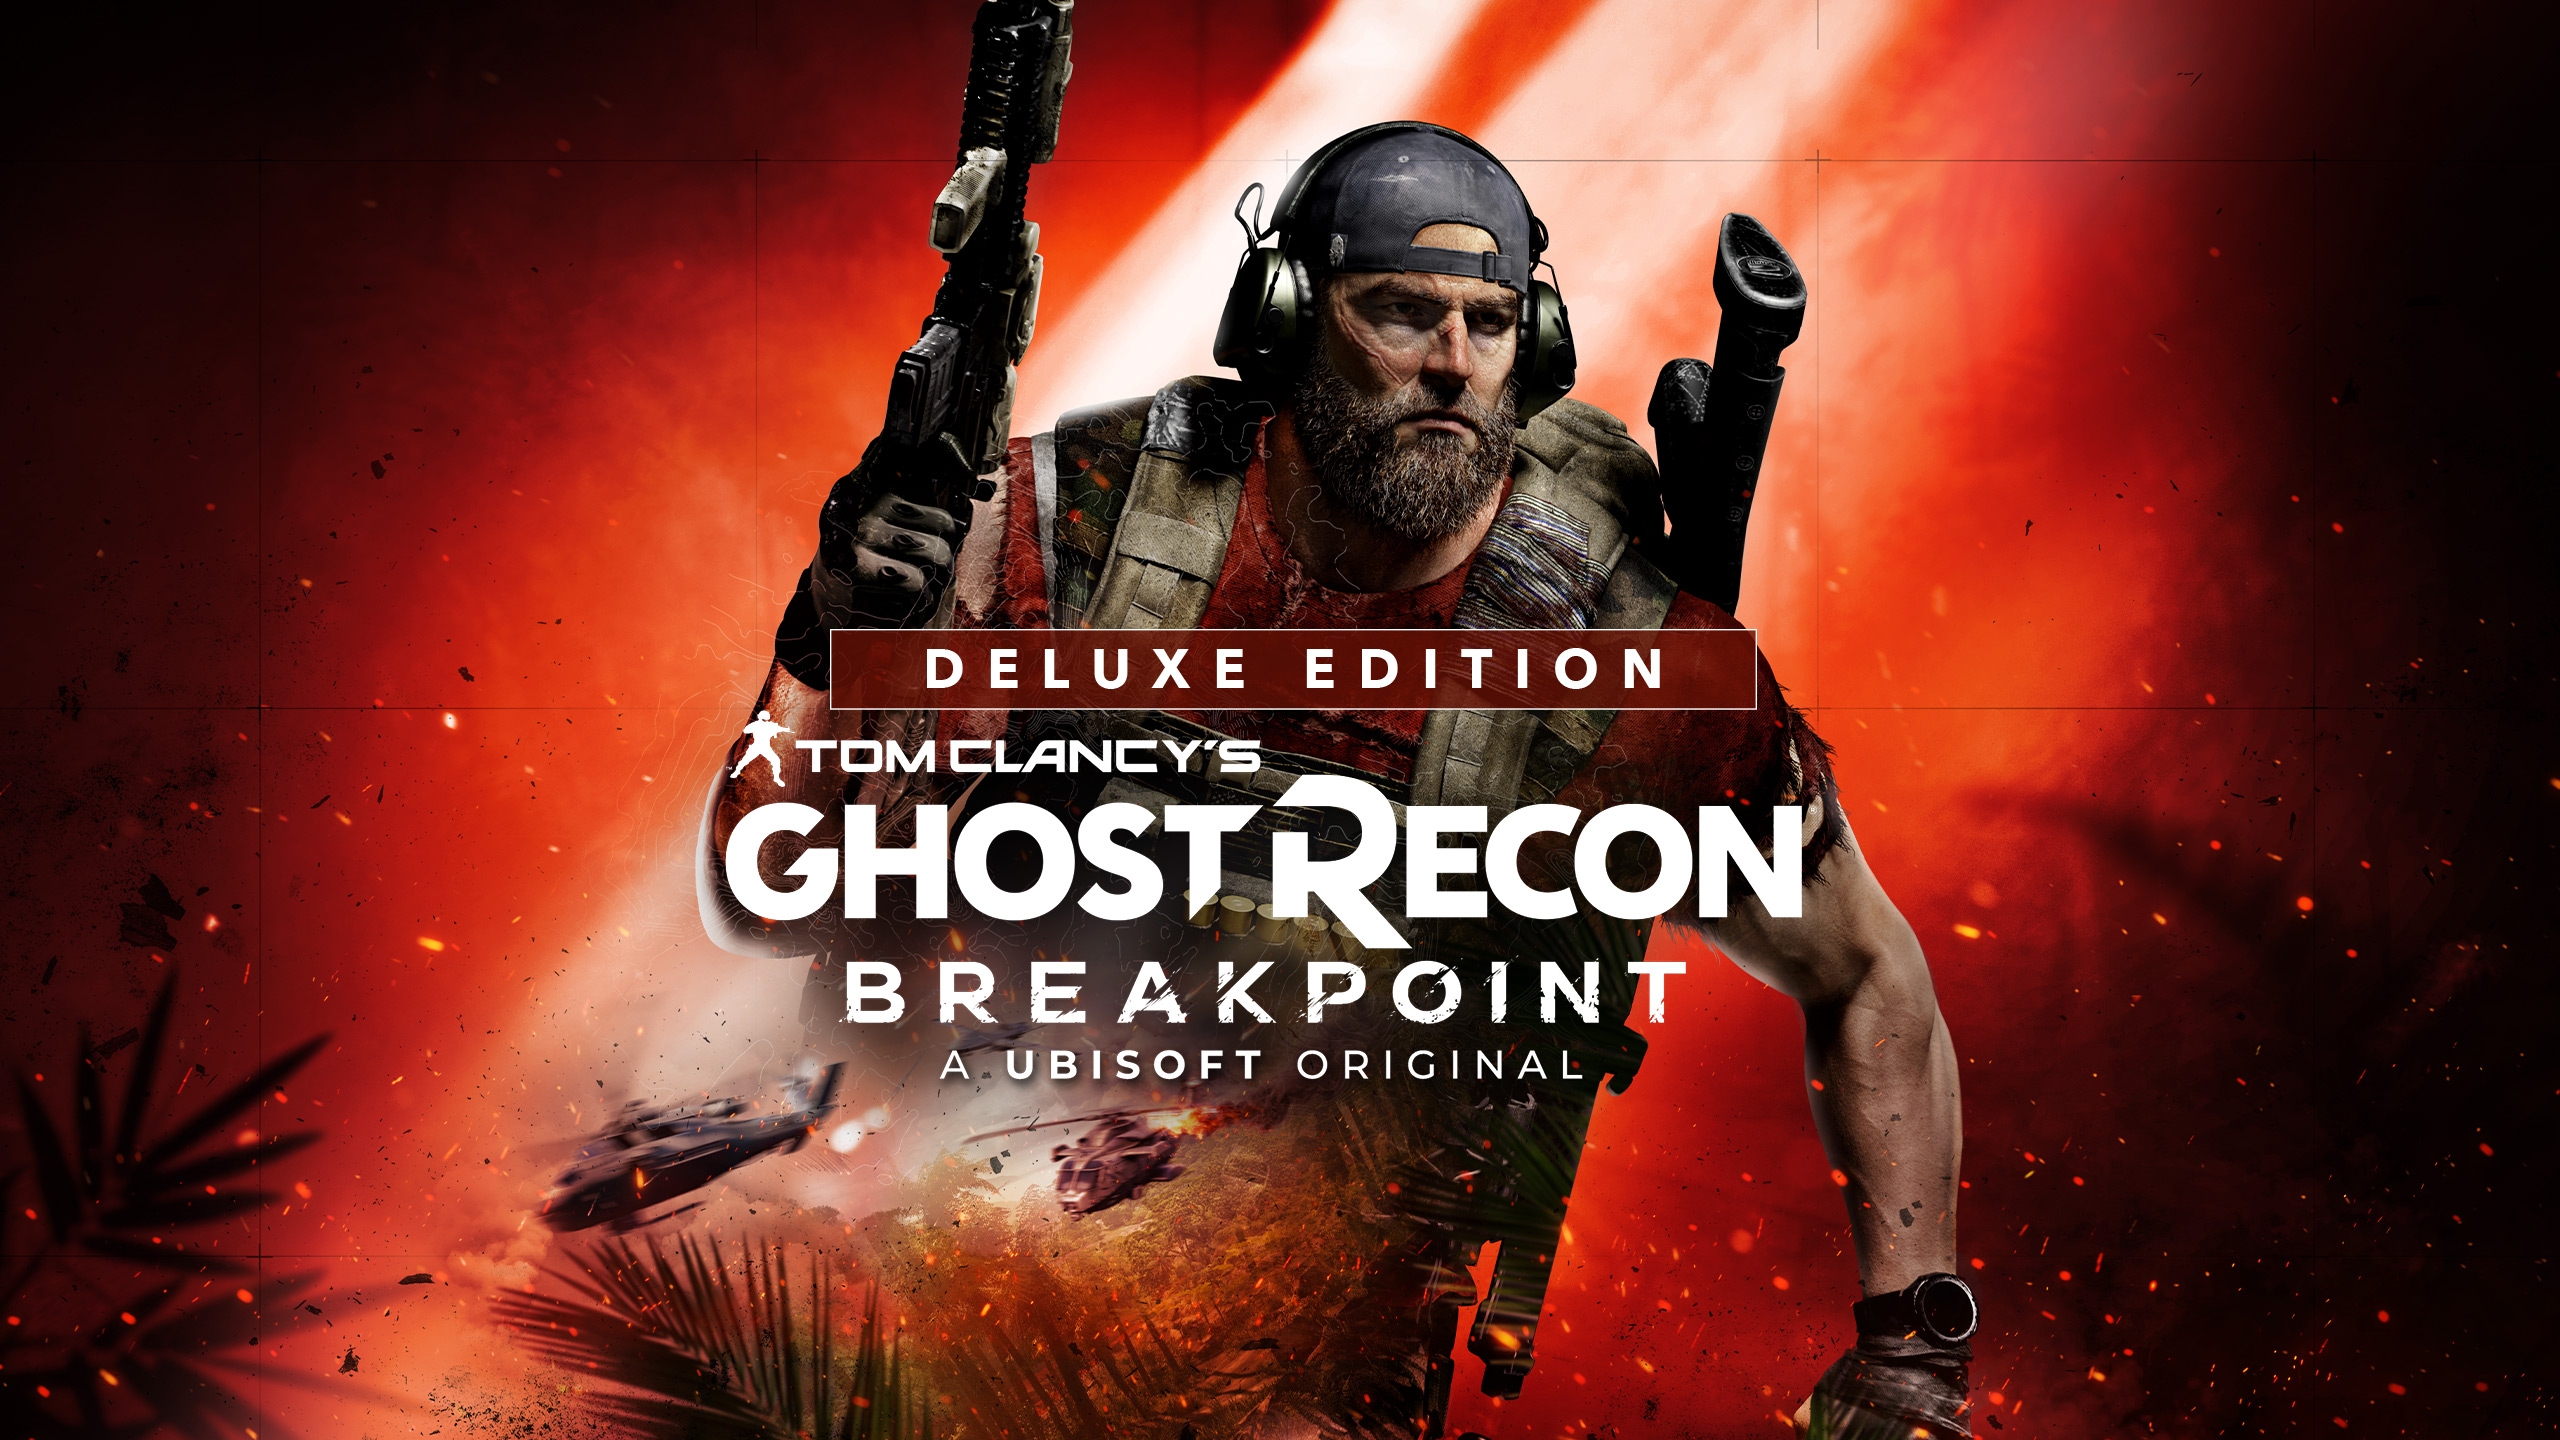 Buy Tom Clancy\'s Ghost Recon: Deluxe Connect Ubisoft Edition Breakpoint